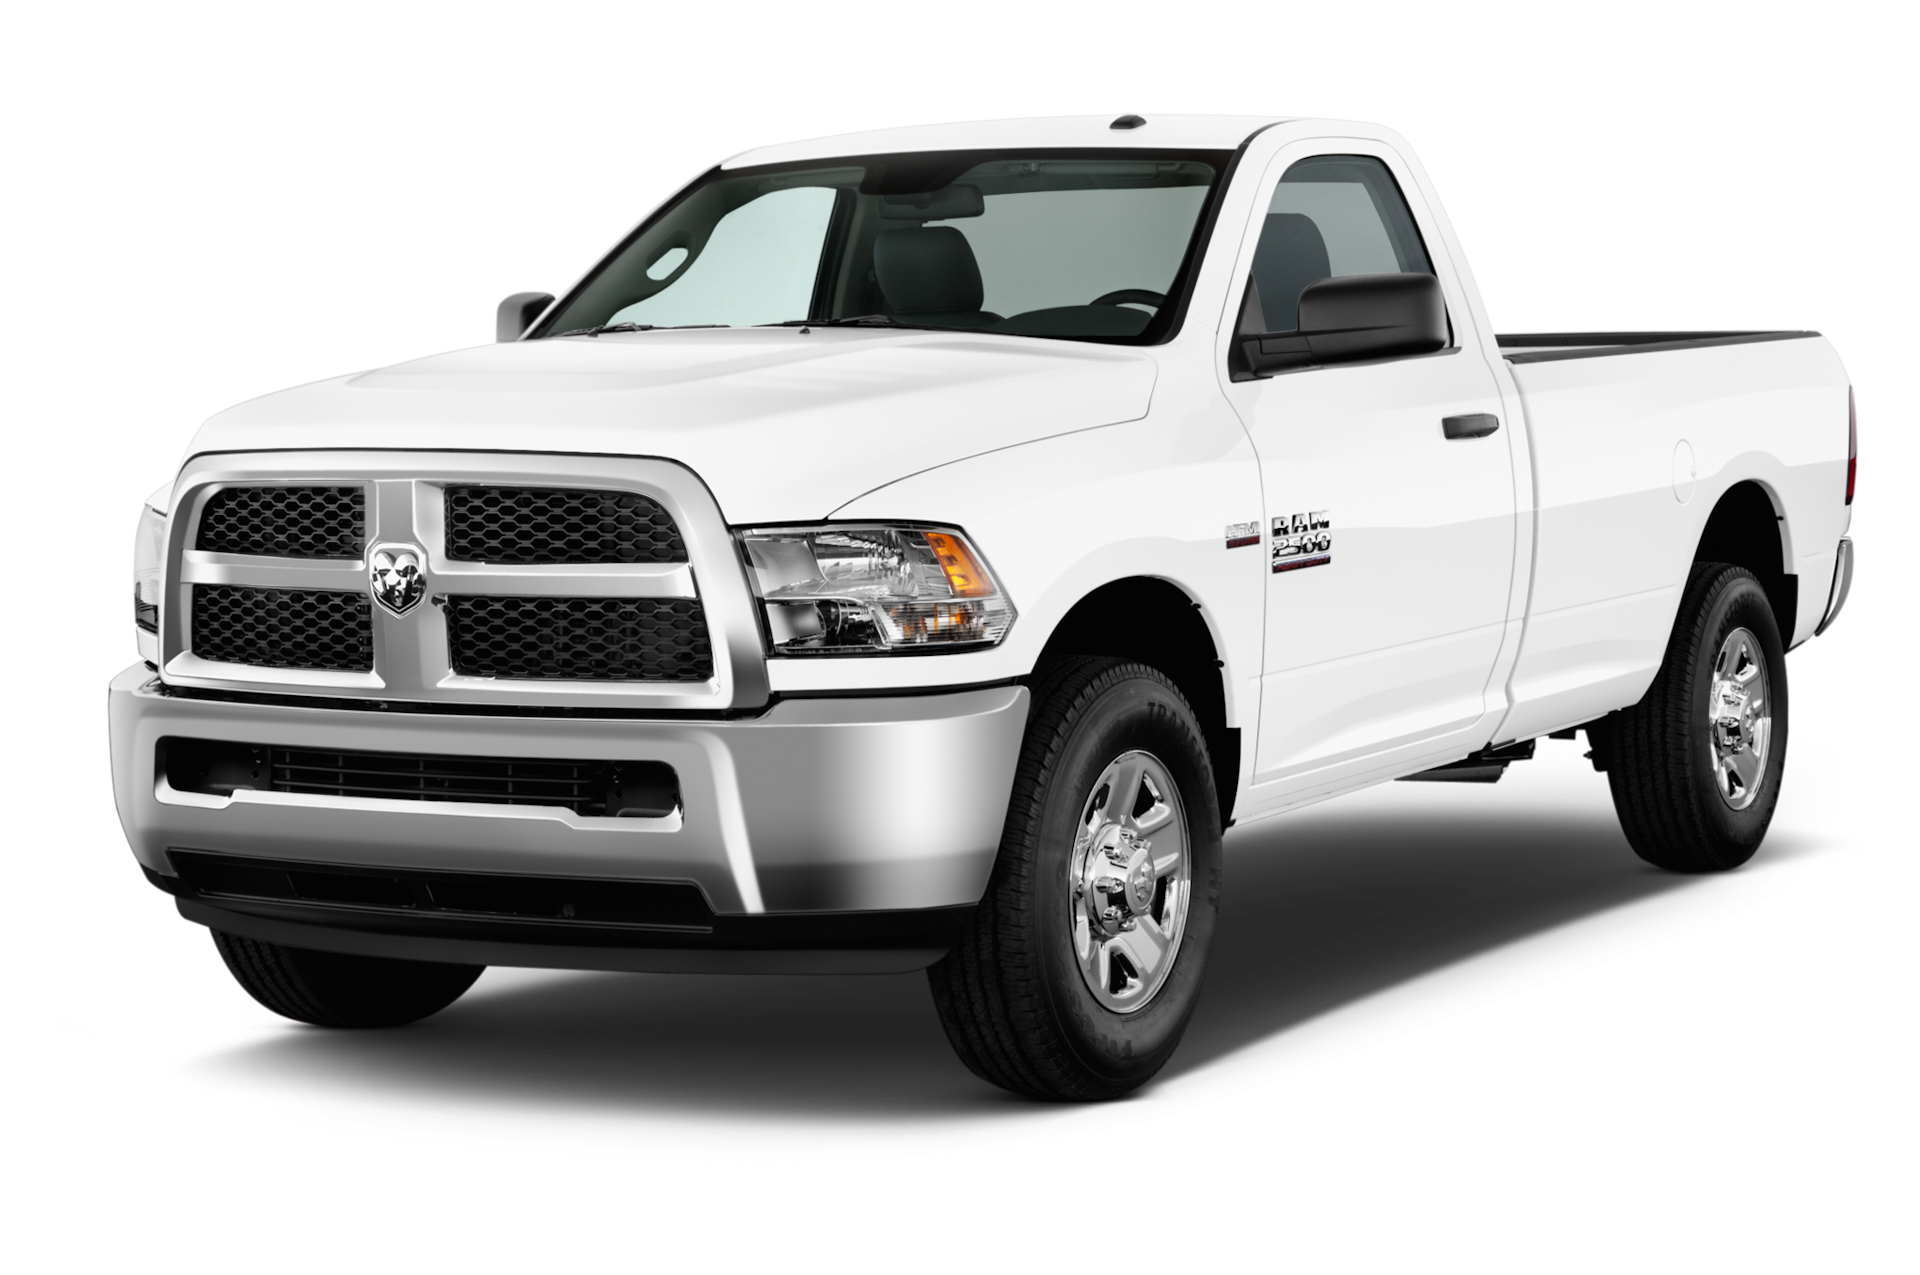 2014 Ram 2500 Prices, Reviews, and Photos - MotorTrend